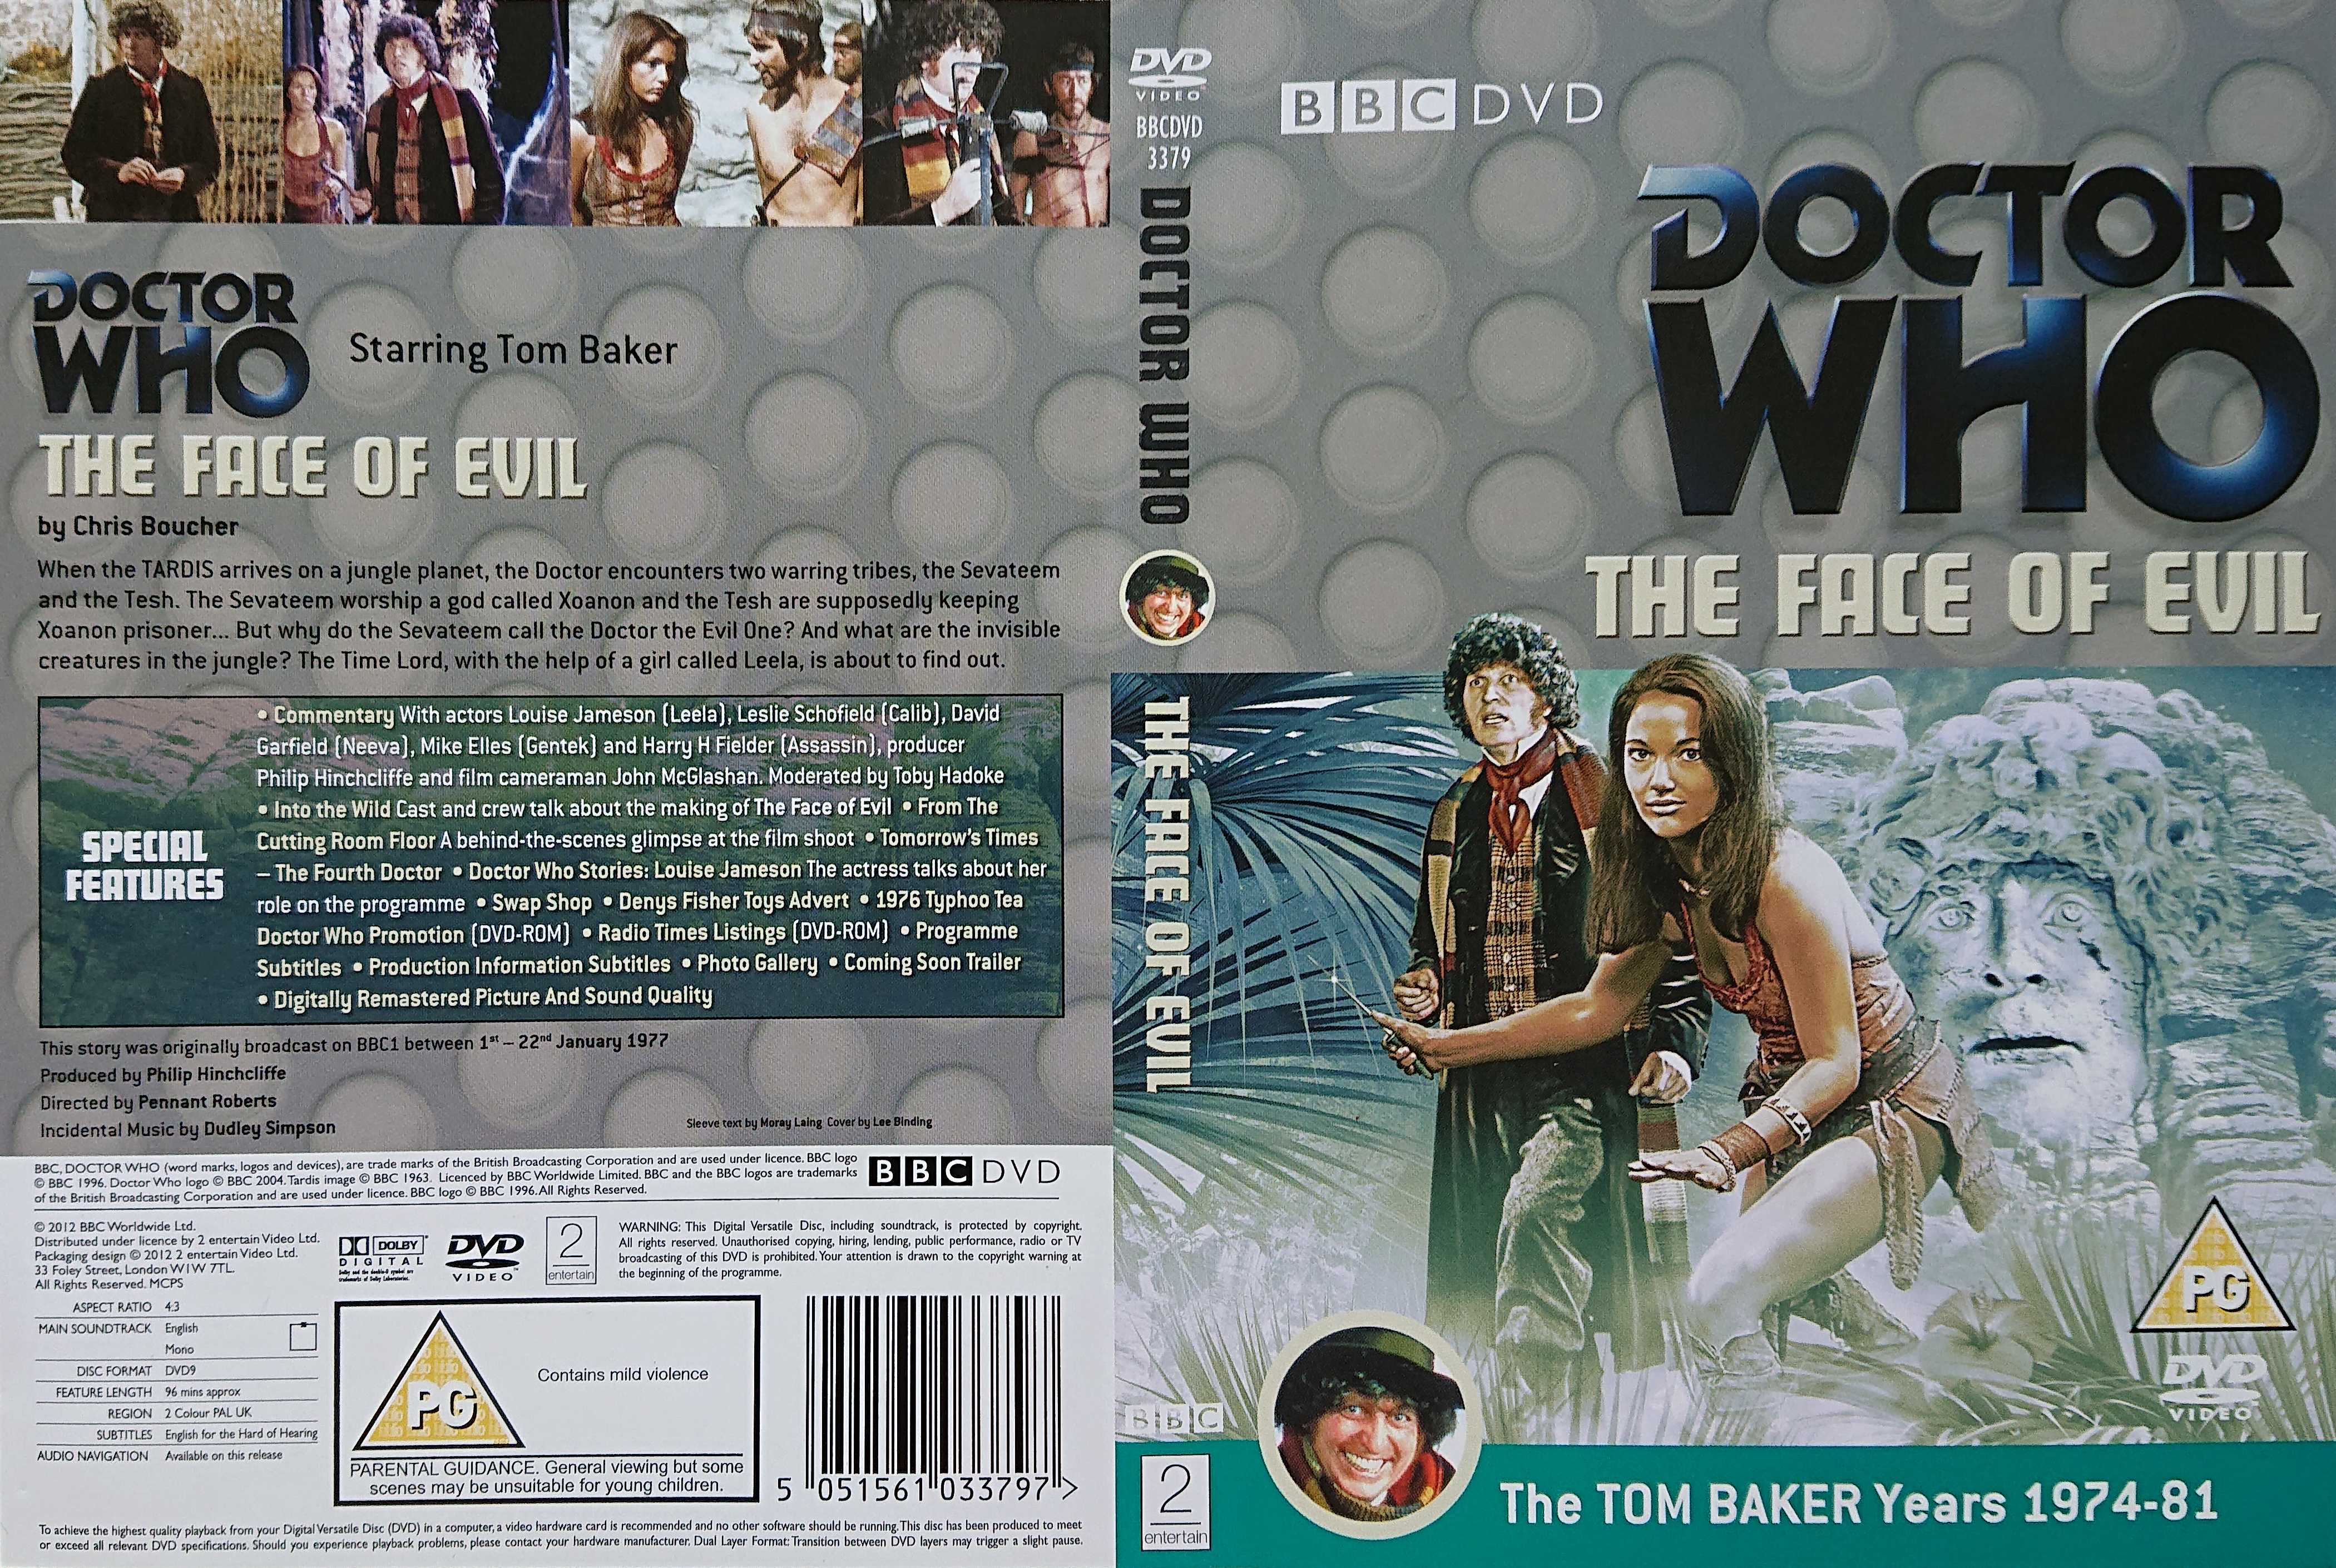 Inserts from BBCDVD 3379